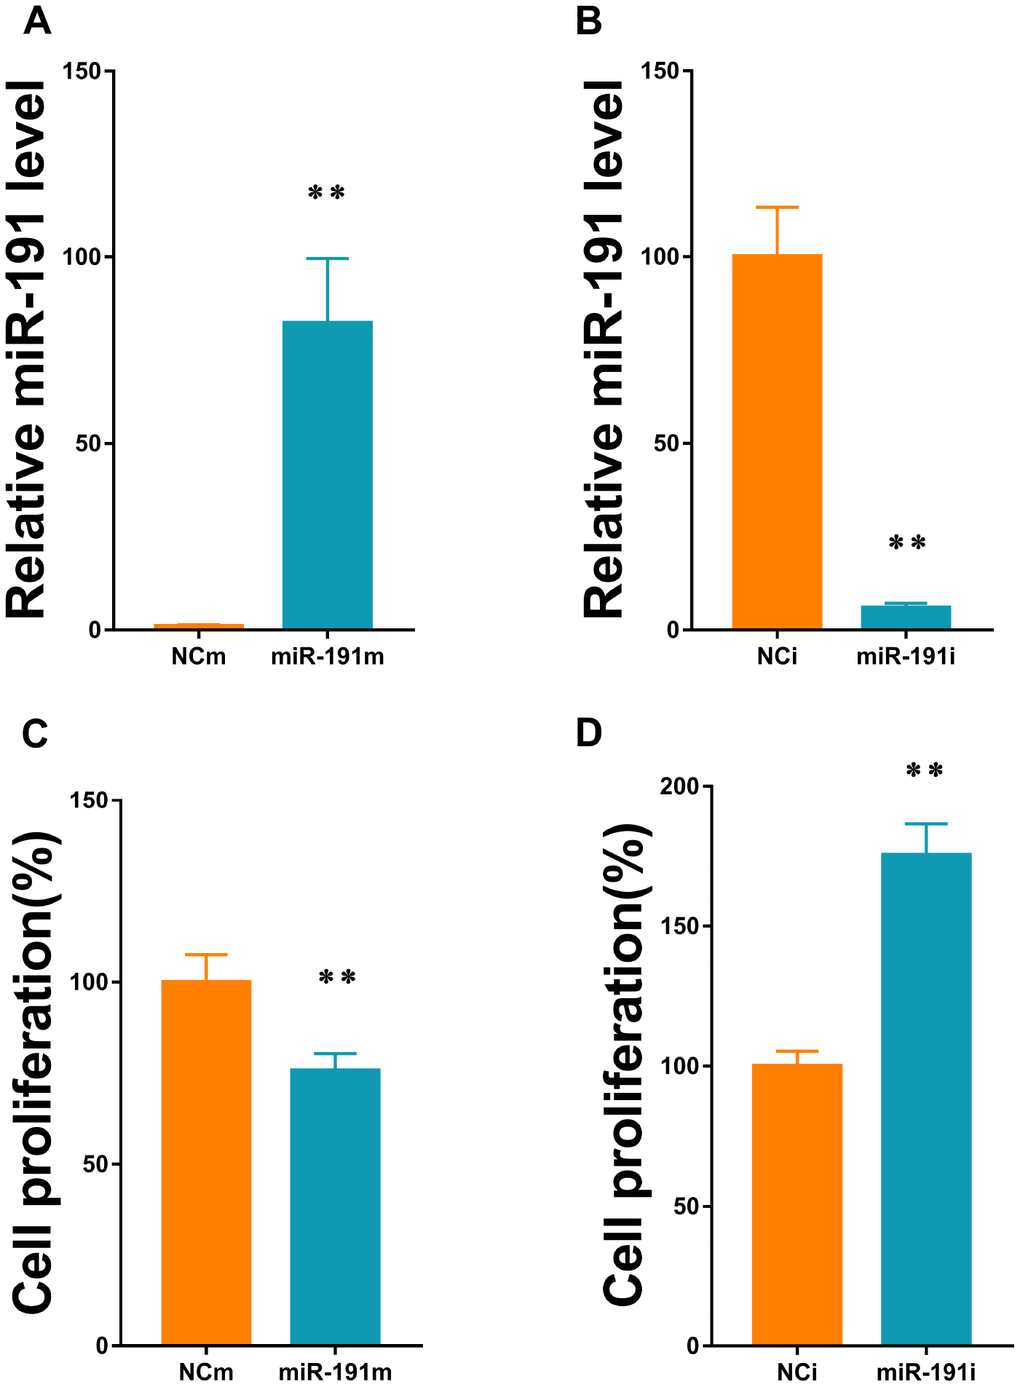 MiR-191 transfection efficiency and cell proliferation. (A, B) Expression level of miR-191 (in fold of NCm or percentage of NCi) in HUVECs that were transfected with miR-191 mimic (A) or miR-191 inhibitor (B) as assessed by real-time PCR (n=6 per group); (C, D) Proliferation (percentage of NCm or NCi) of HUVECs transfected with miR-191 mimic (C) or miR-191 inhibitor (D) as assessed by CCK-8 assay (n =6 per group). After transfection, the cells were reseeded into 96-well plates and incubated for another 48 h. Means ± SEM. ** P